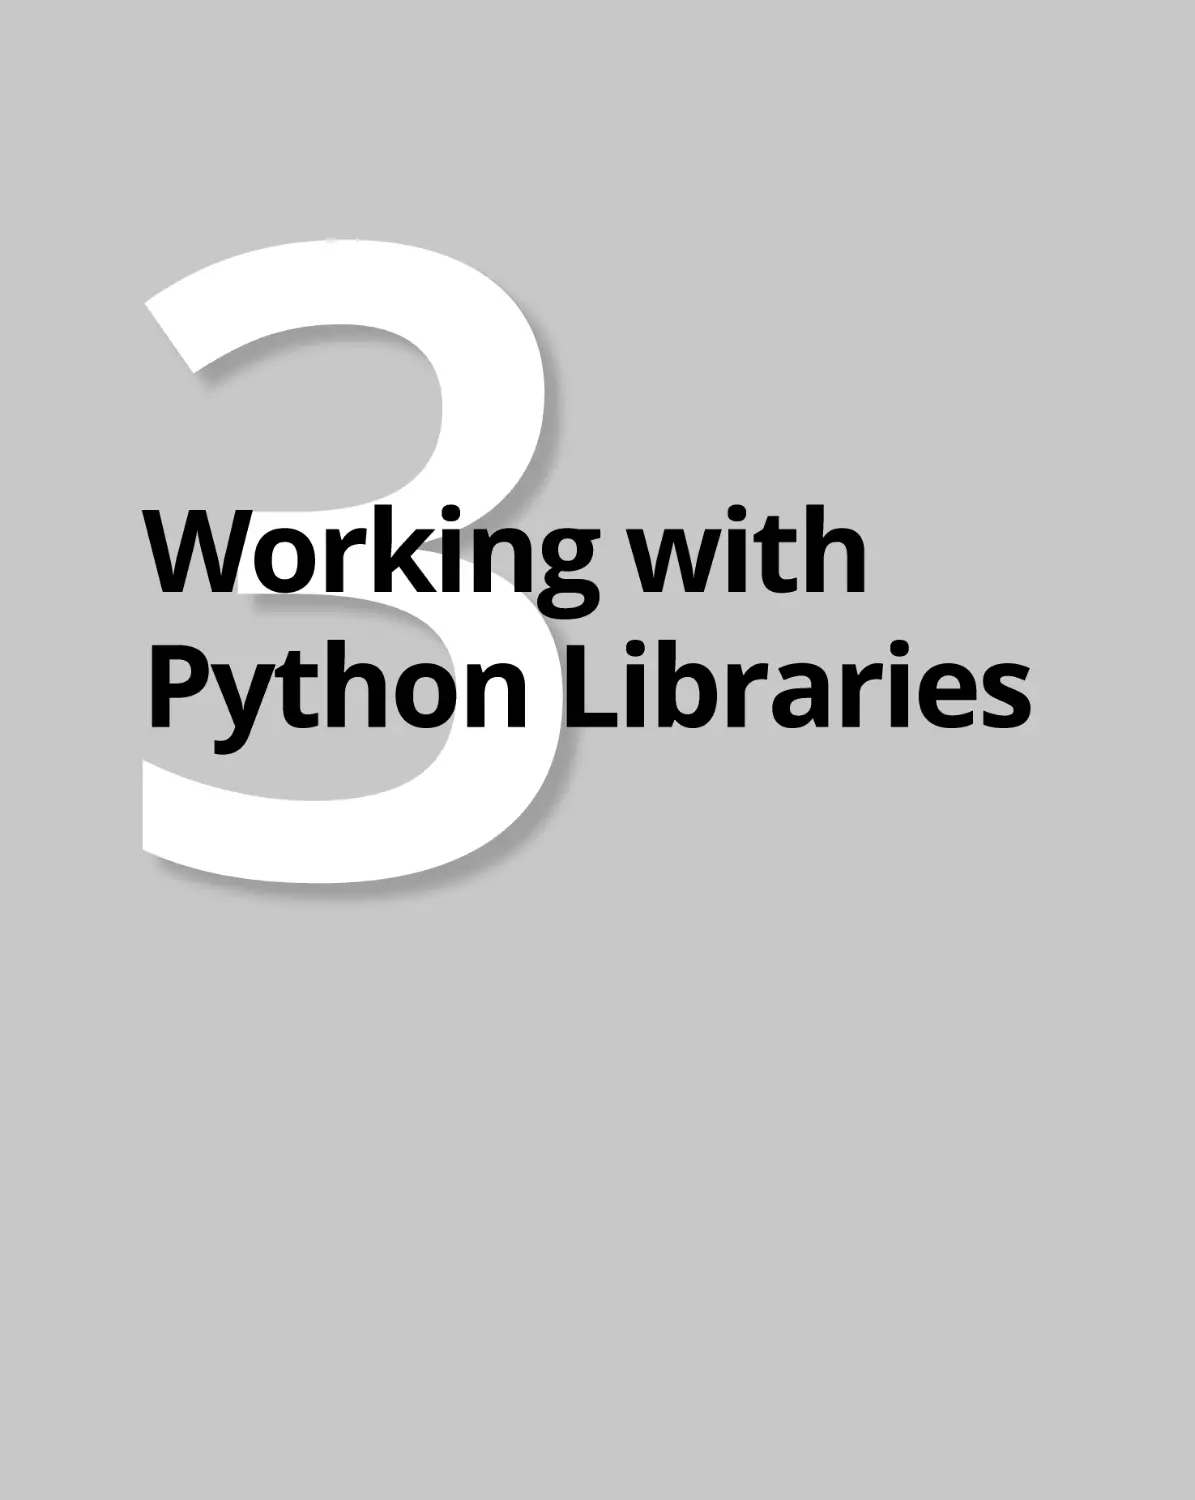 Book
3 Working with Python Libraries